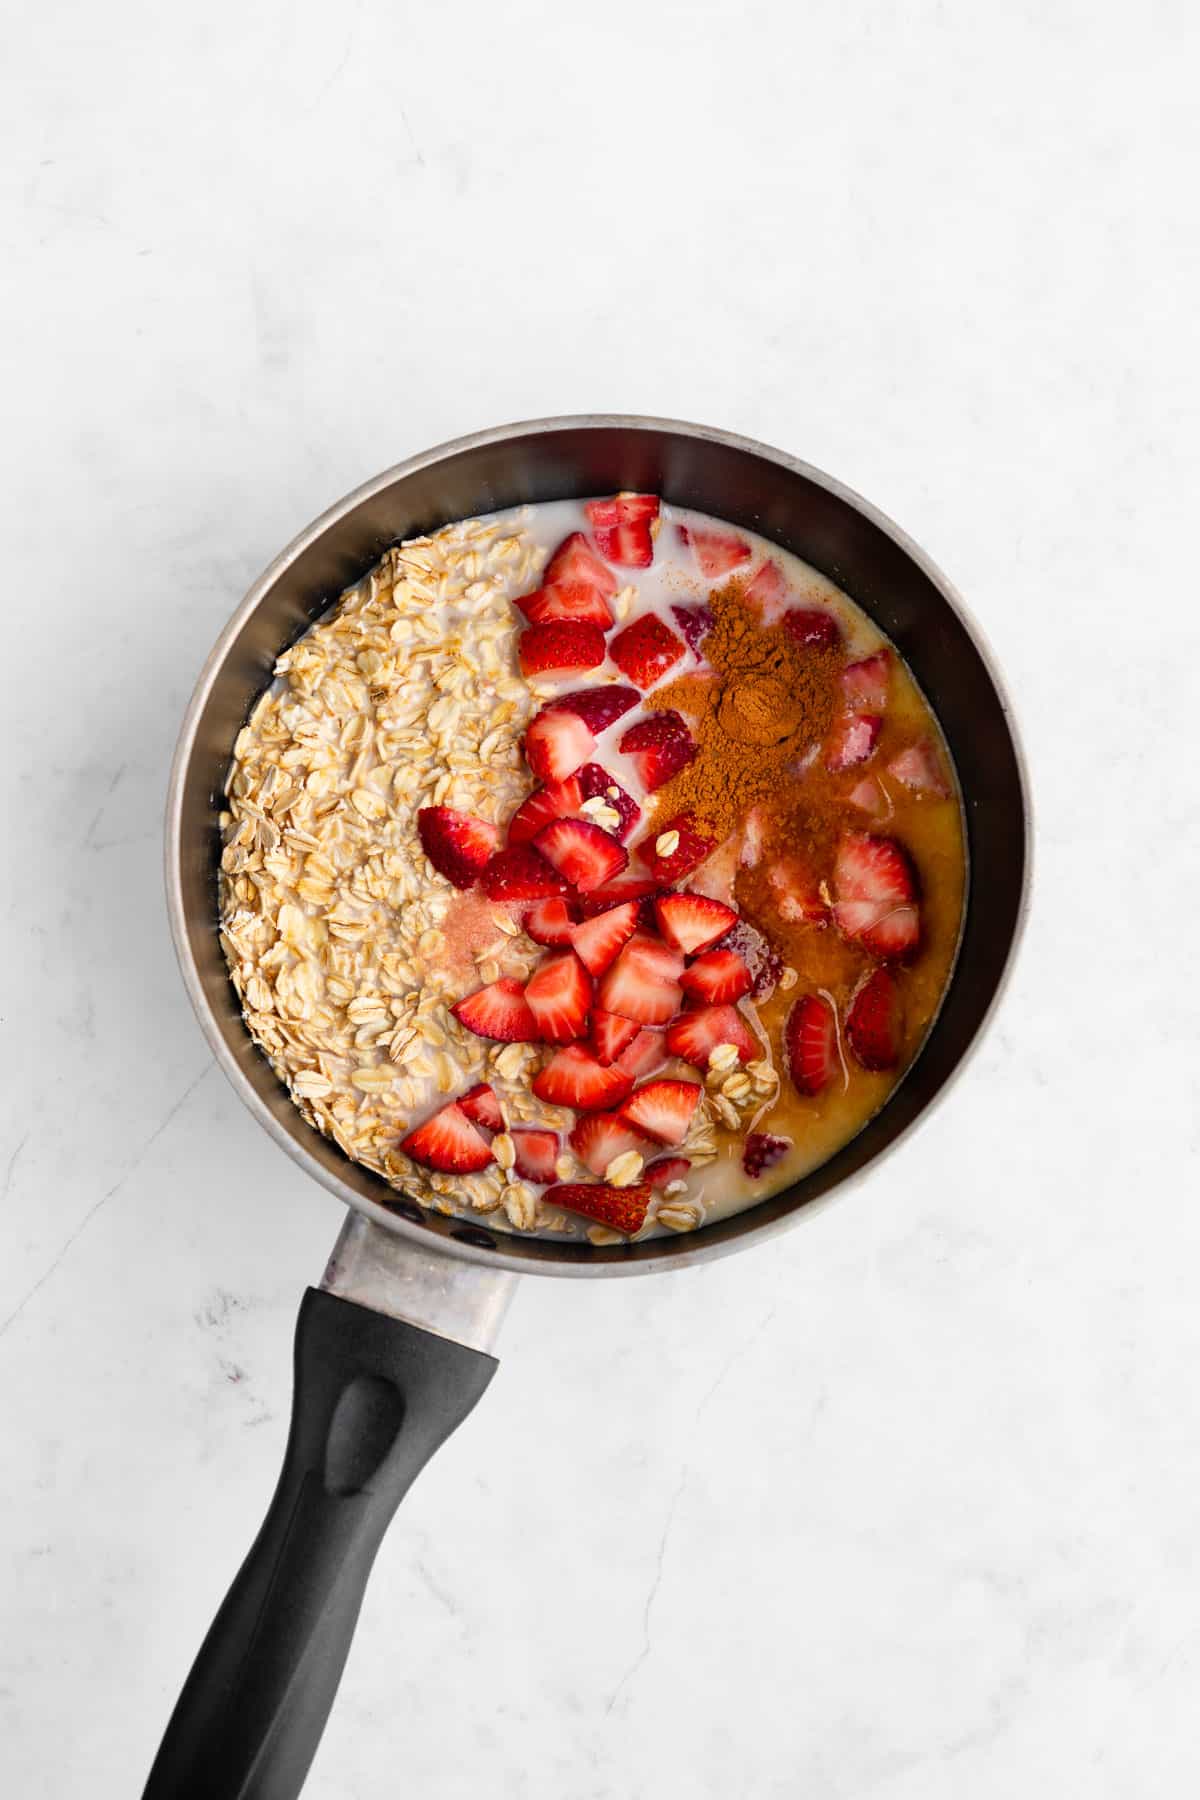 rolled oats, strawberries, almond milk, maple syrup, and cinnamon inside a pot